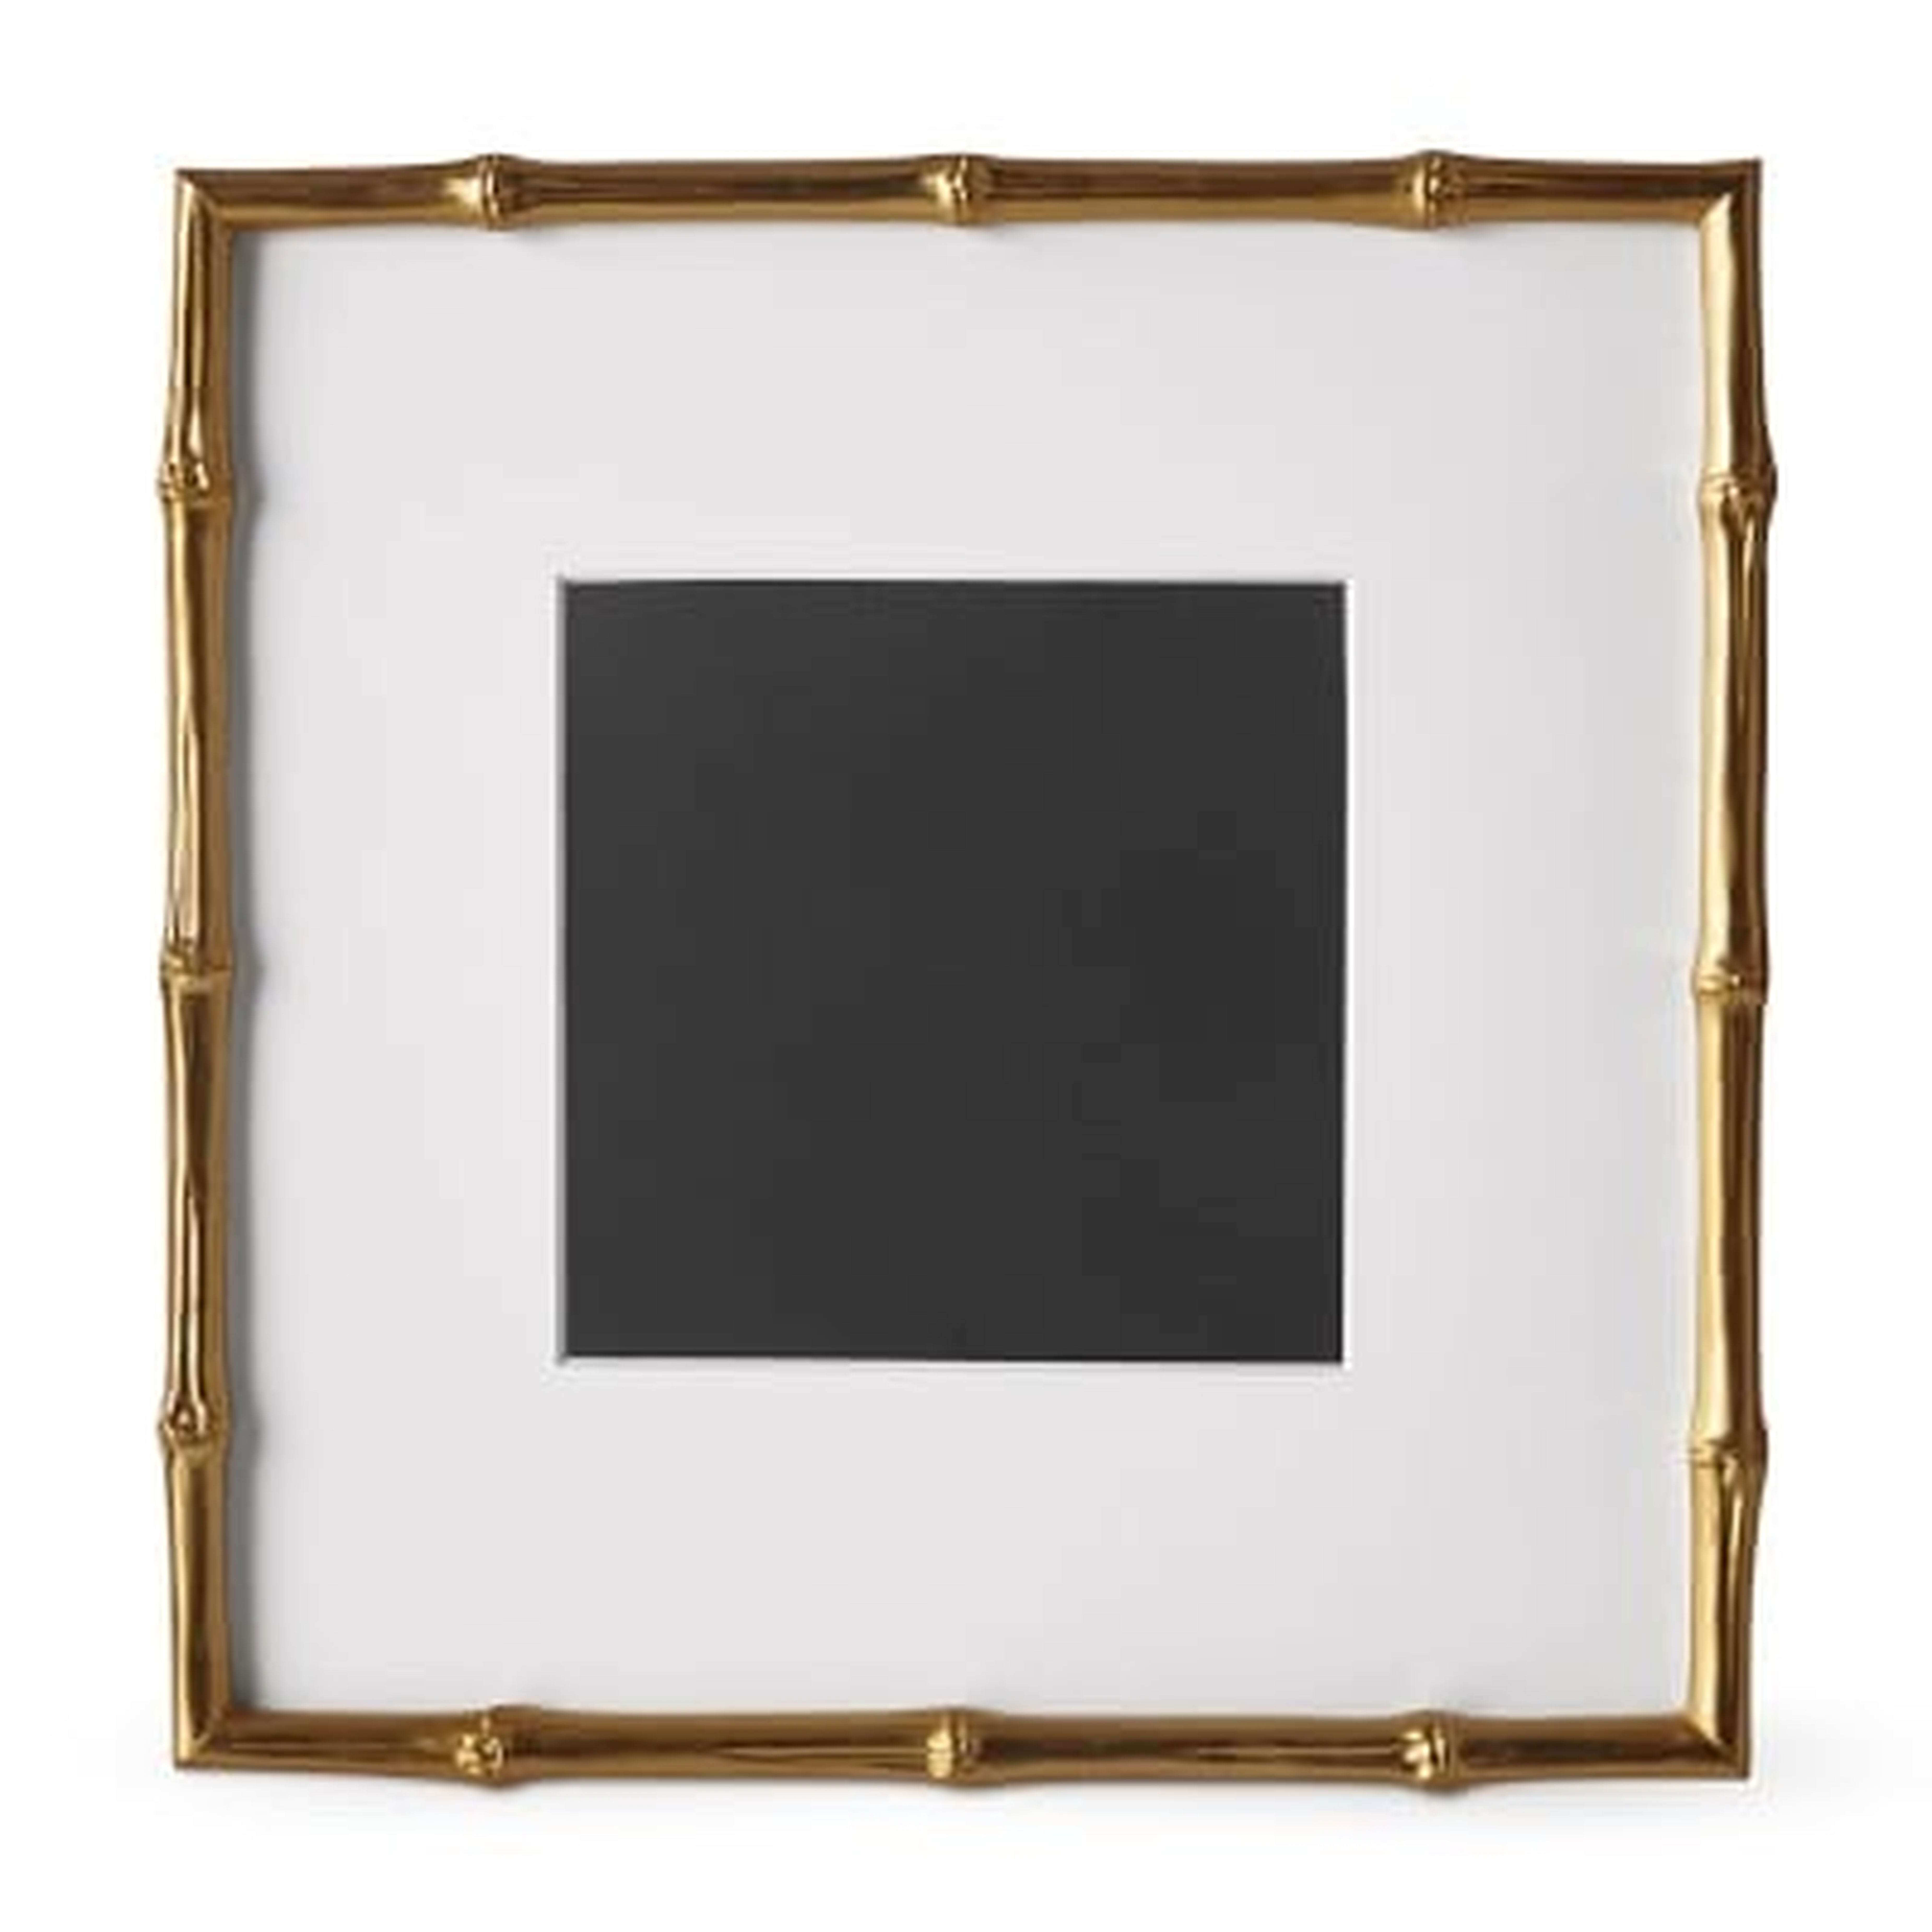 AERIN Gilded Bamboo Gallery Frame, 8" X 8" - Williams Sonoma